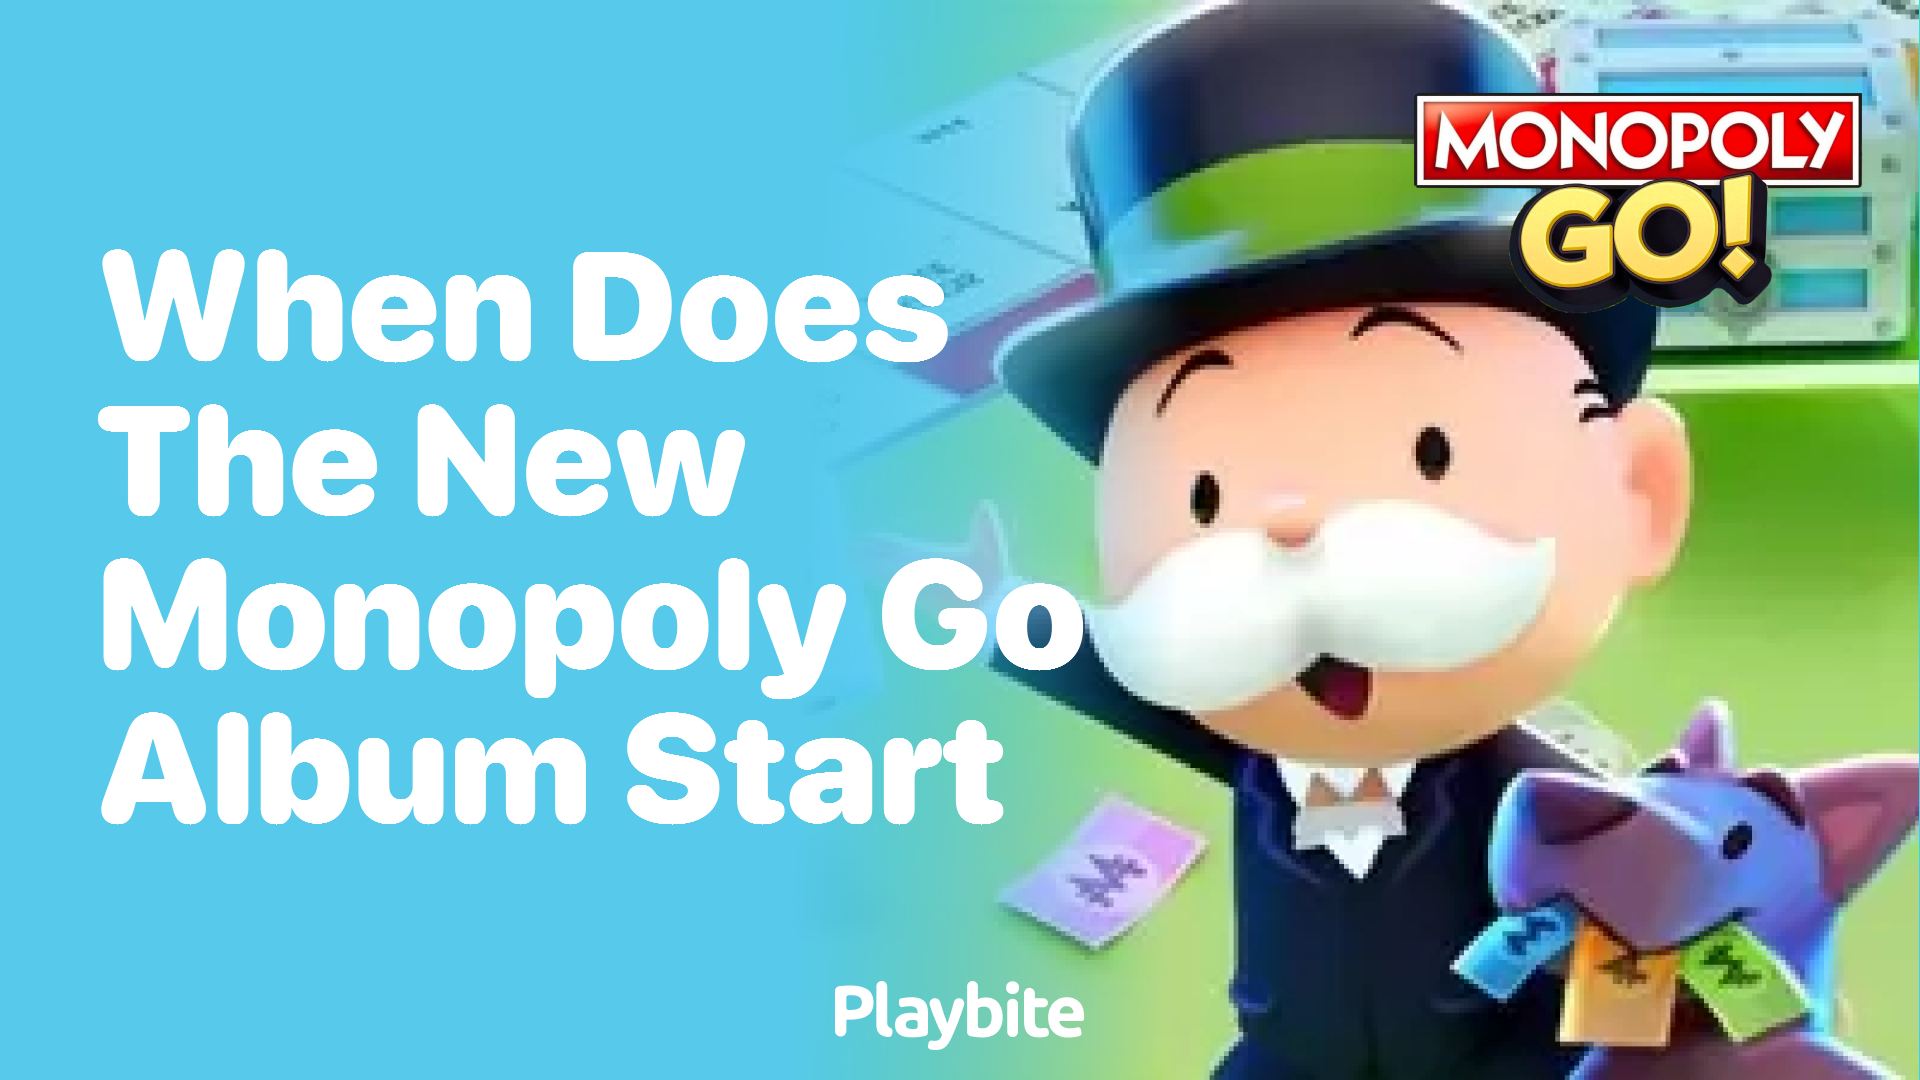 When Does the New Monopoly Go Album Start?